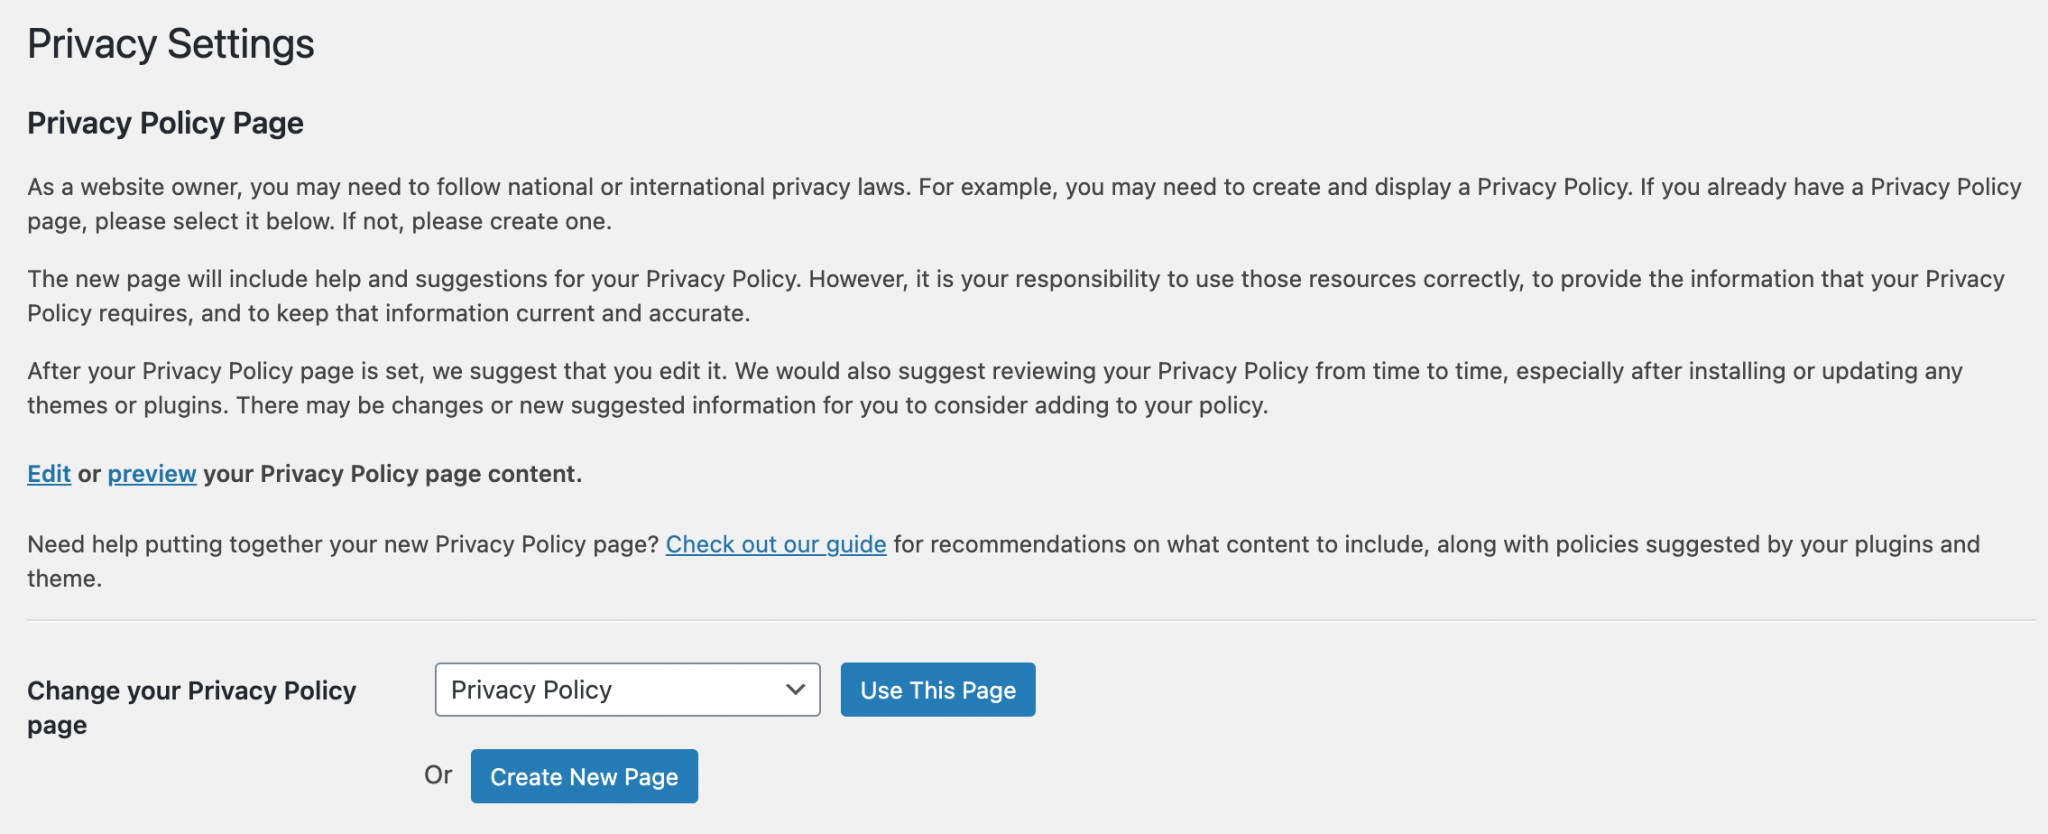 GDPR Privacy Settings about the Privacy Policy Page